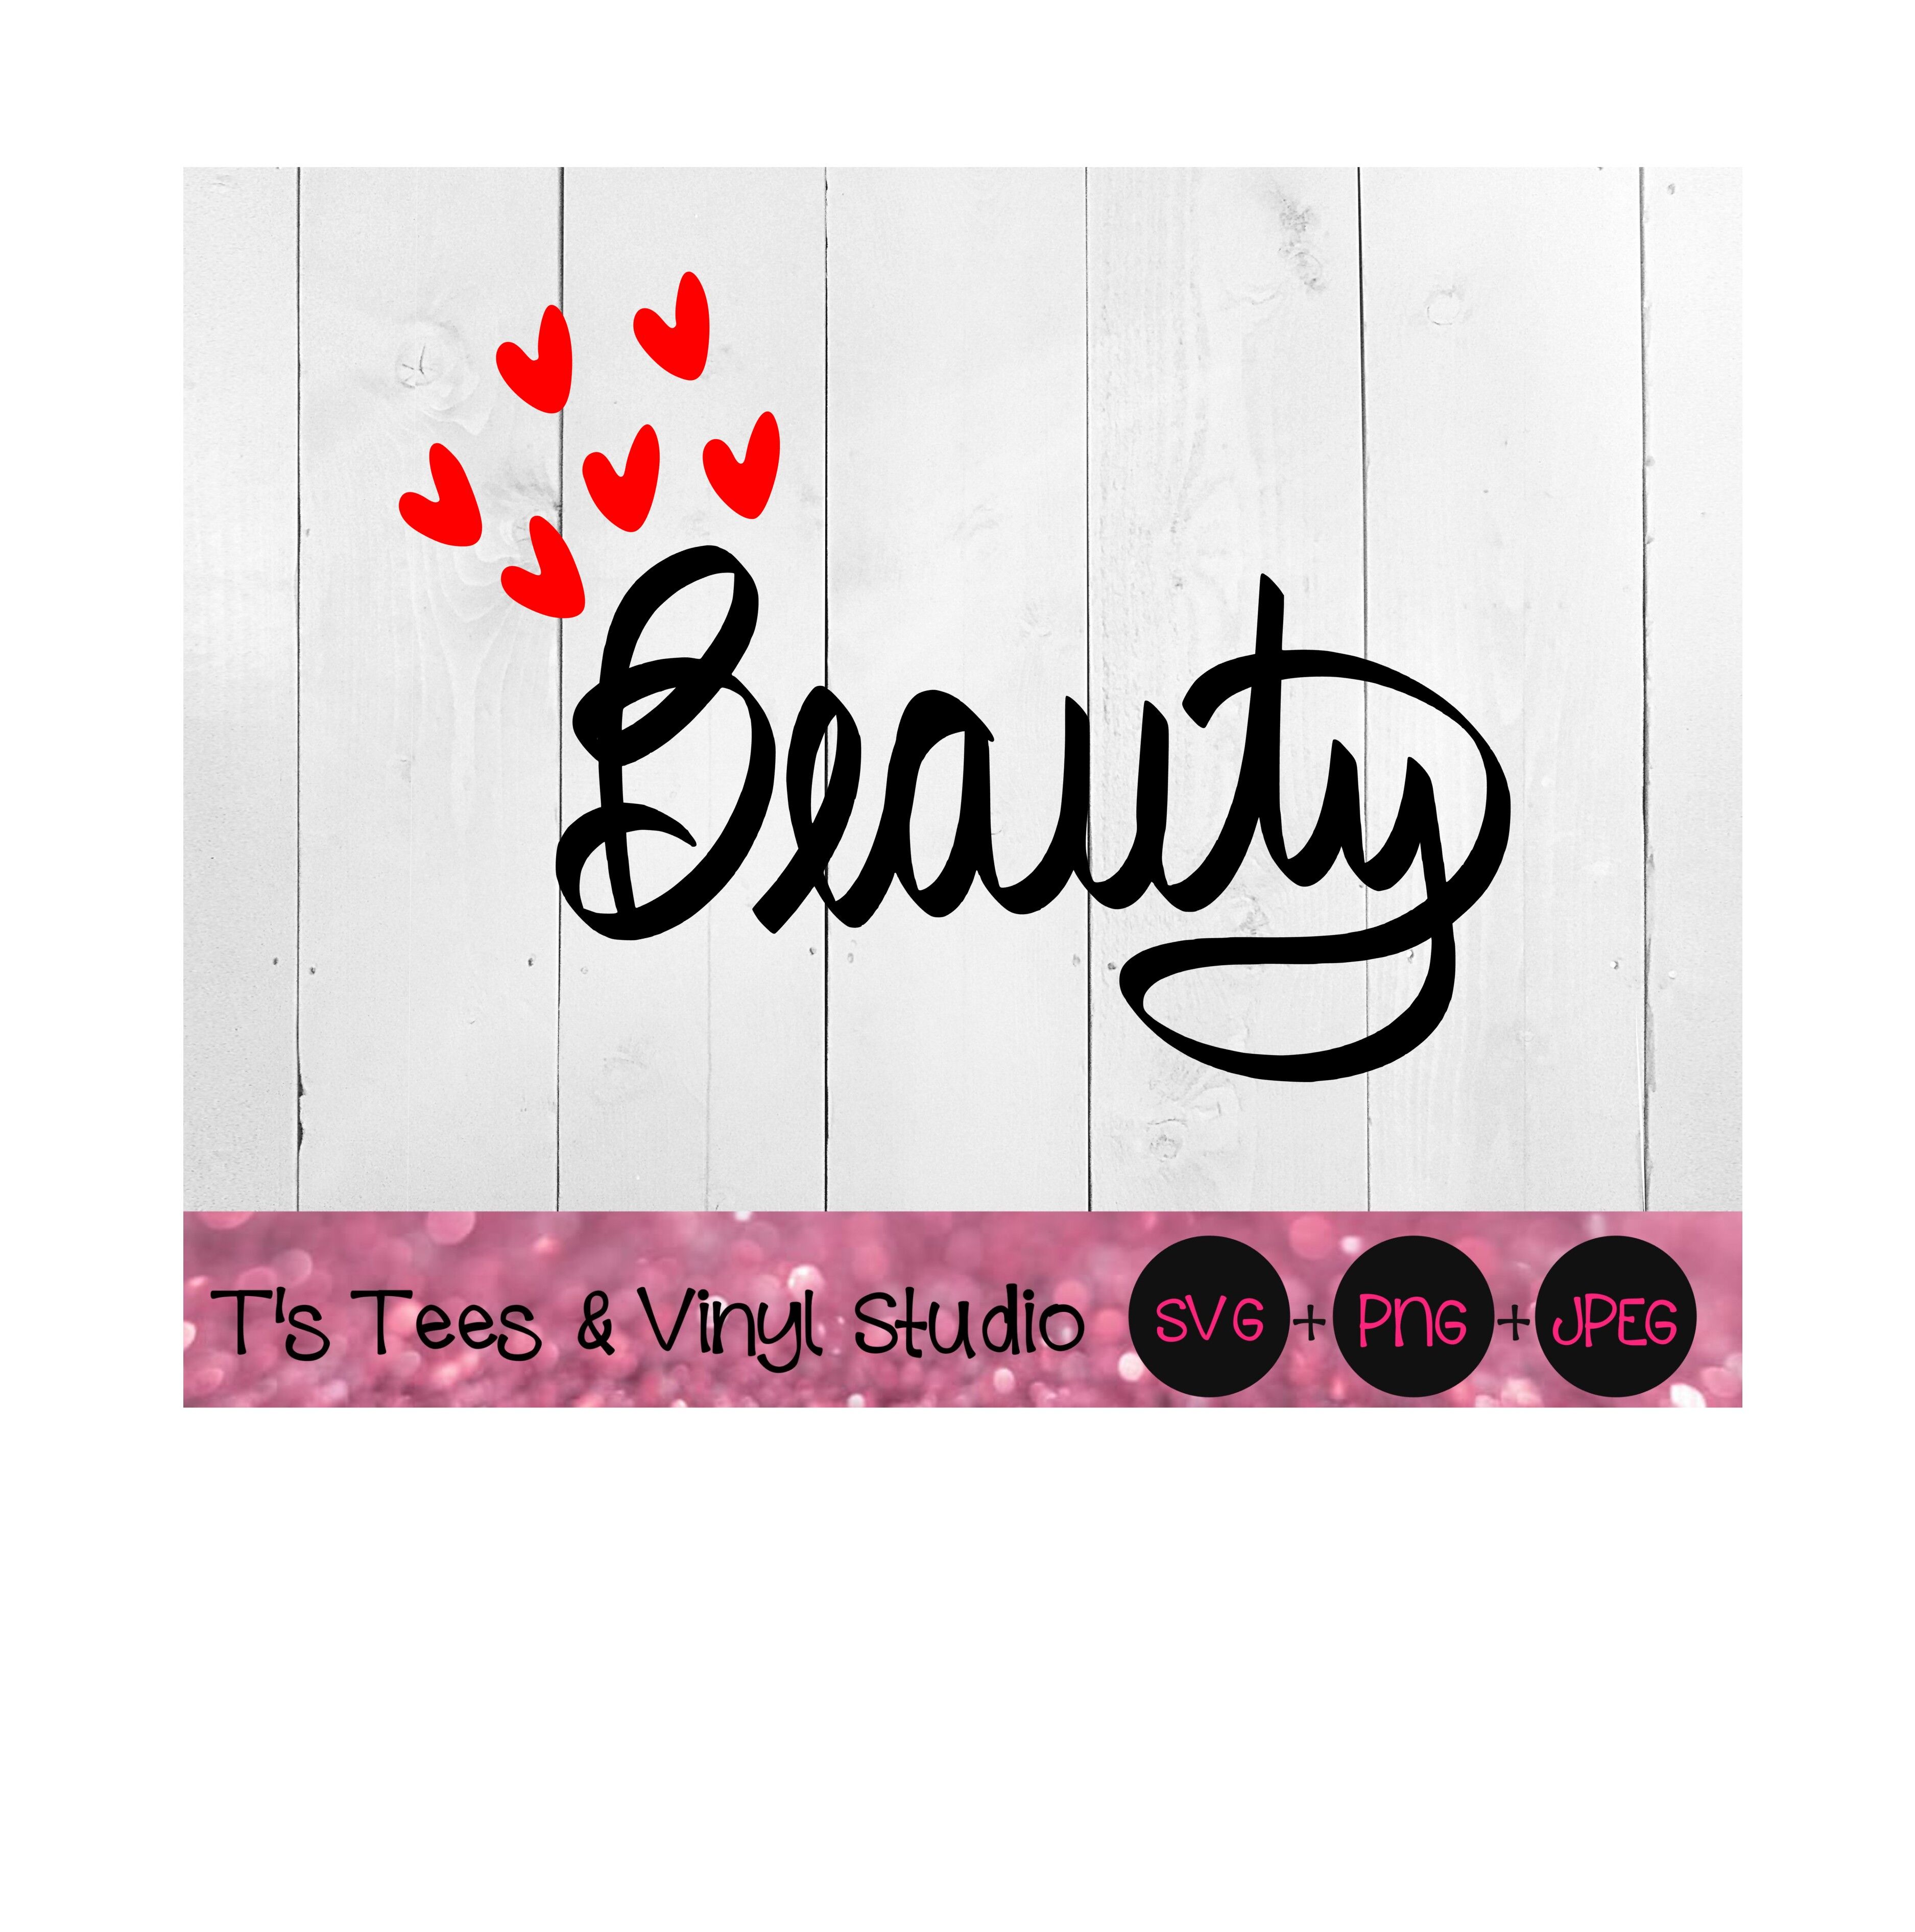 Beauty Svg Beautiful Svg Hearts Svg Hand Lettered Svg Beauty Png By T S Tees Vinyl Studio Thehungryjpeg Com